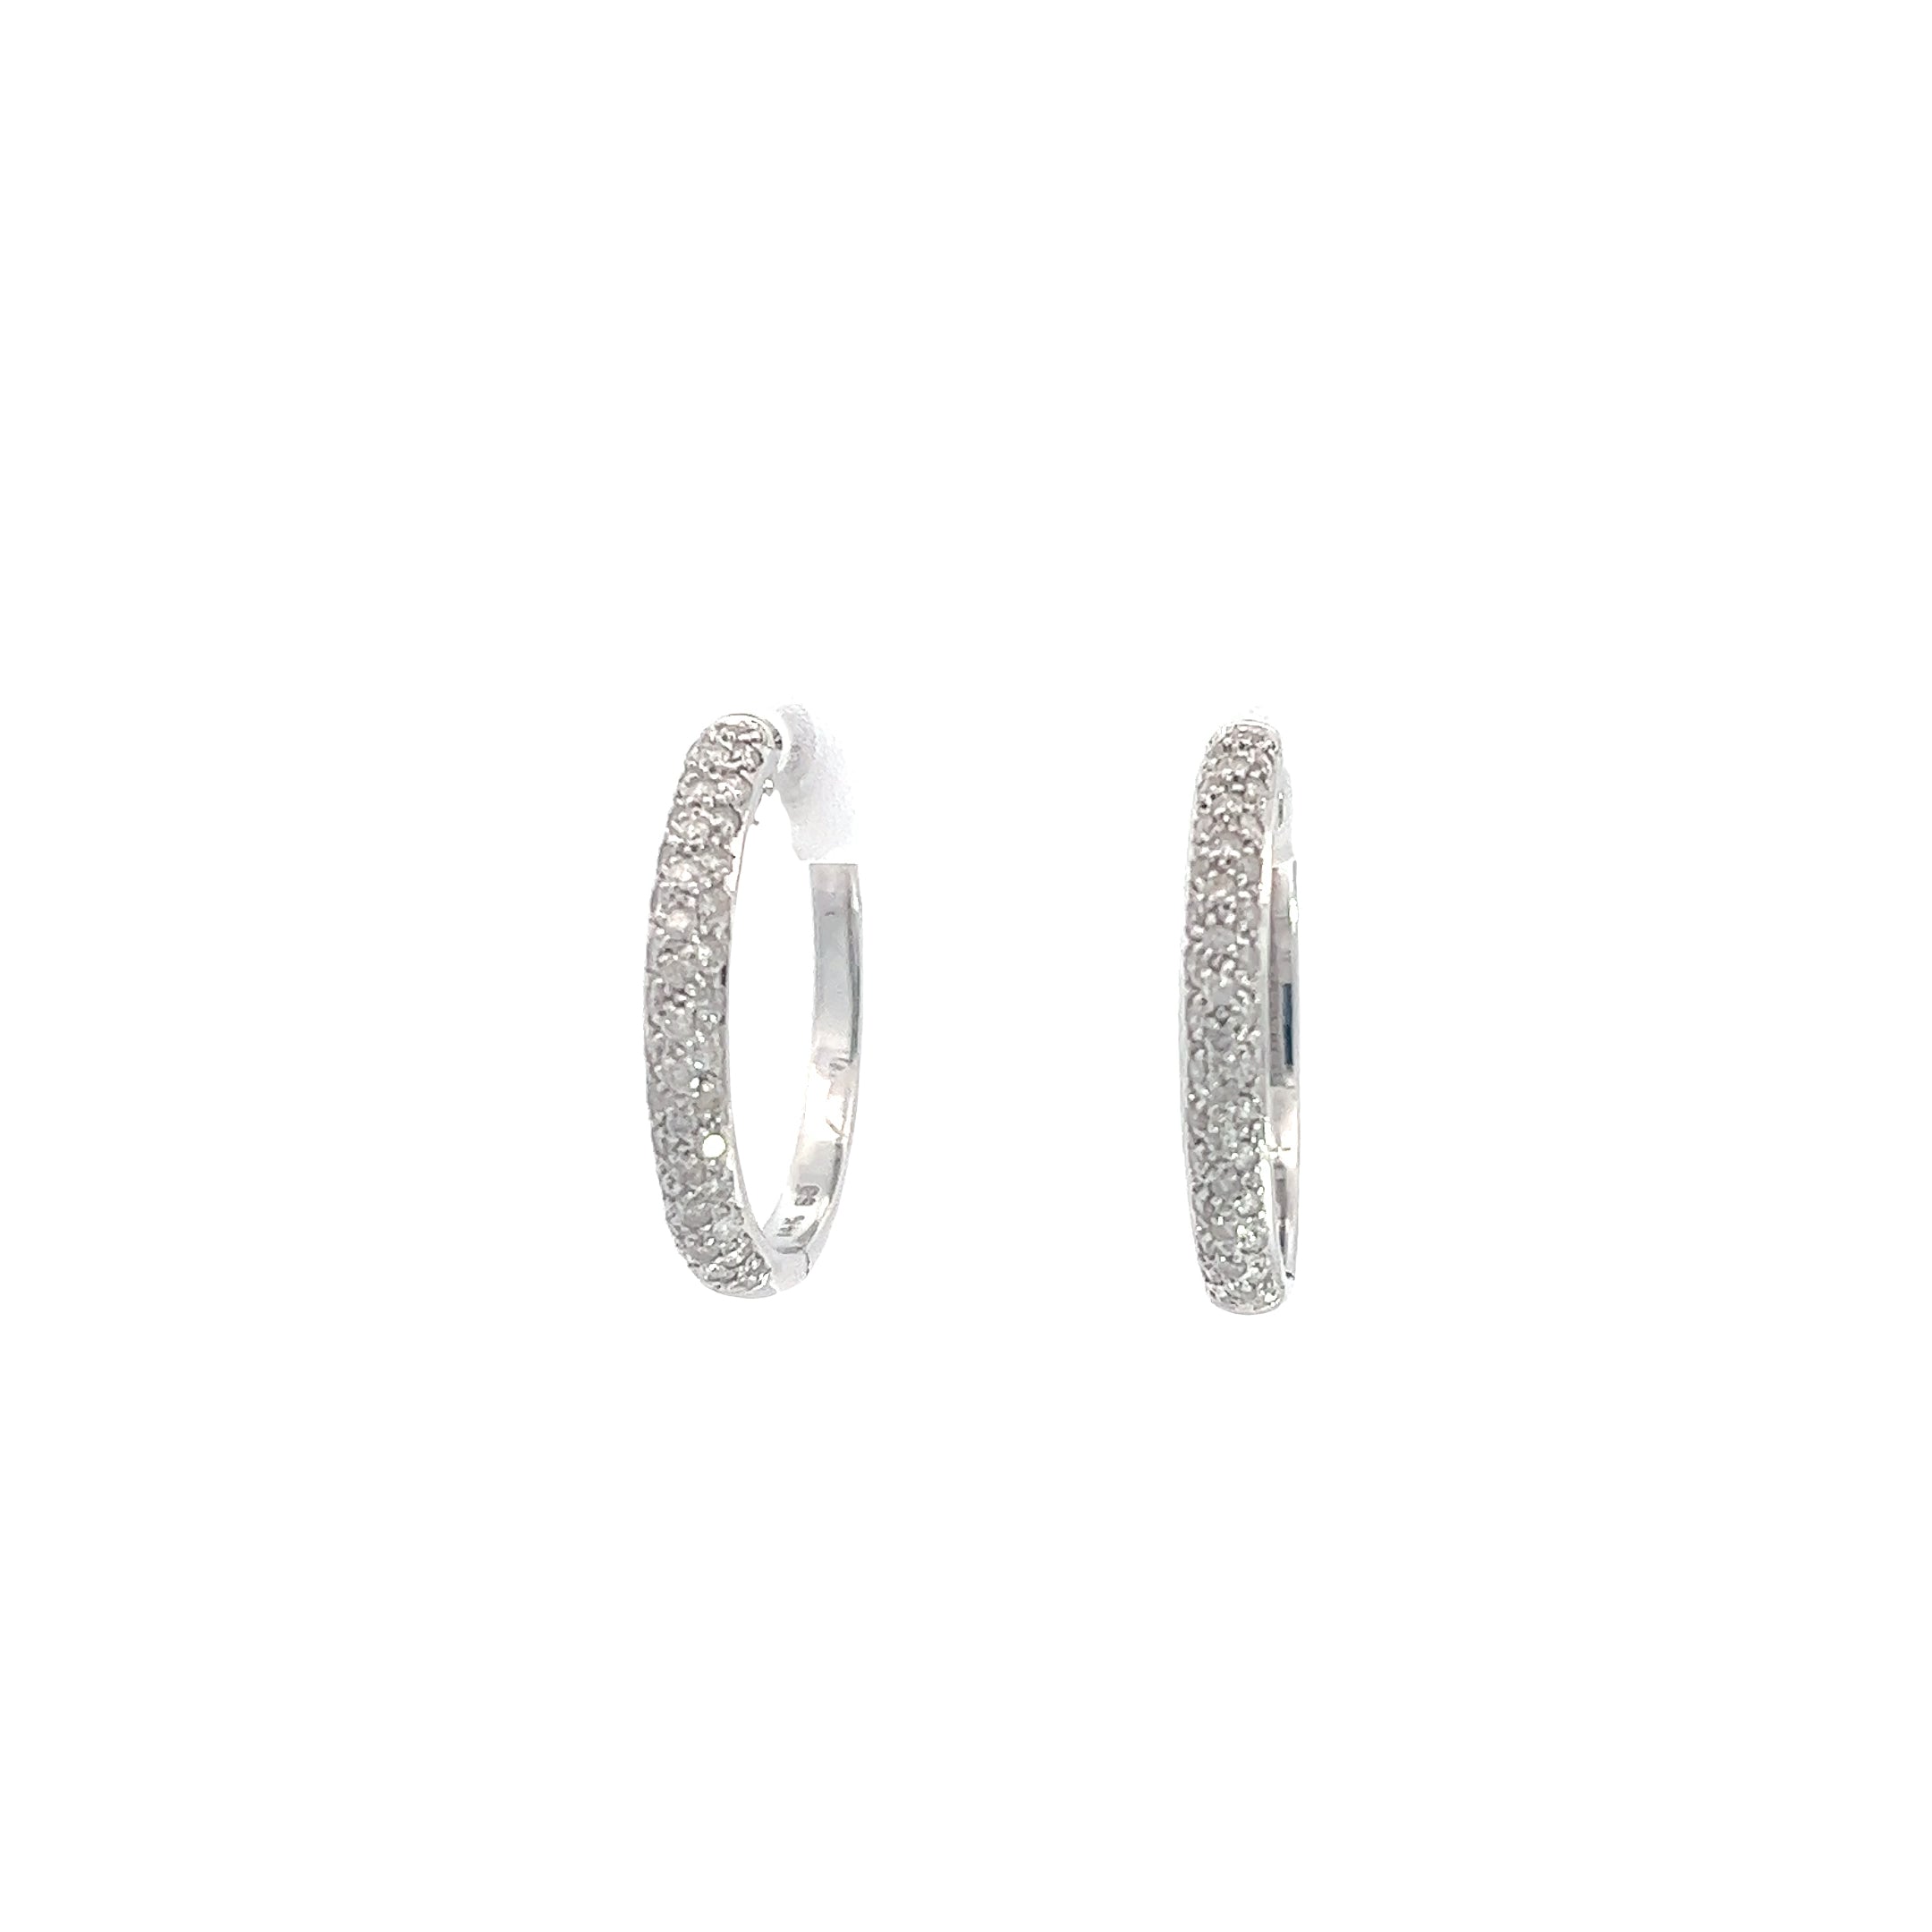 14K WHITE GOLD .50CT H SI2 PAVE 1 INCH HOOP EARRINGS